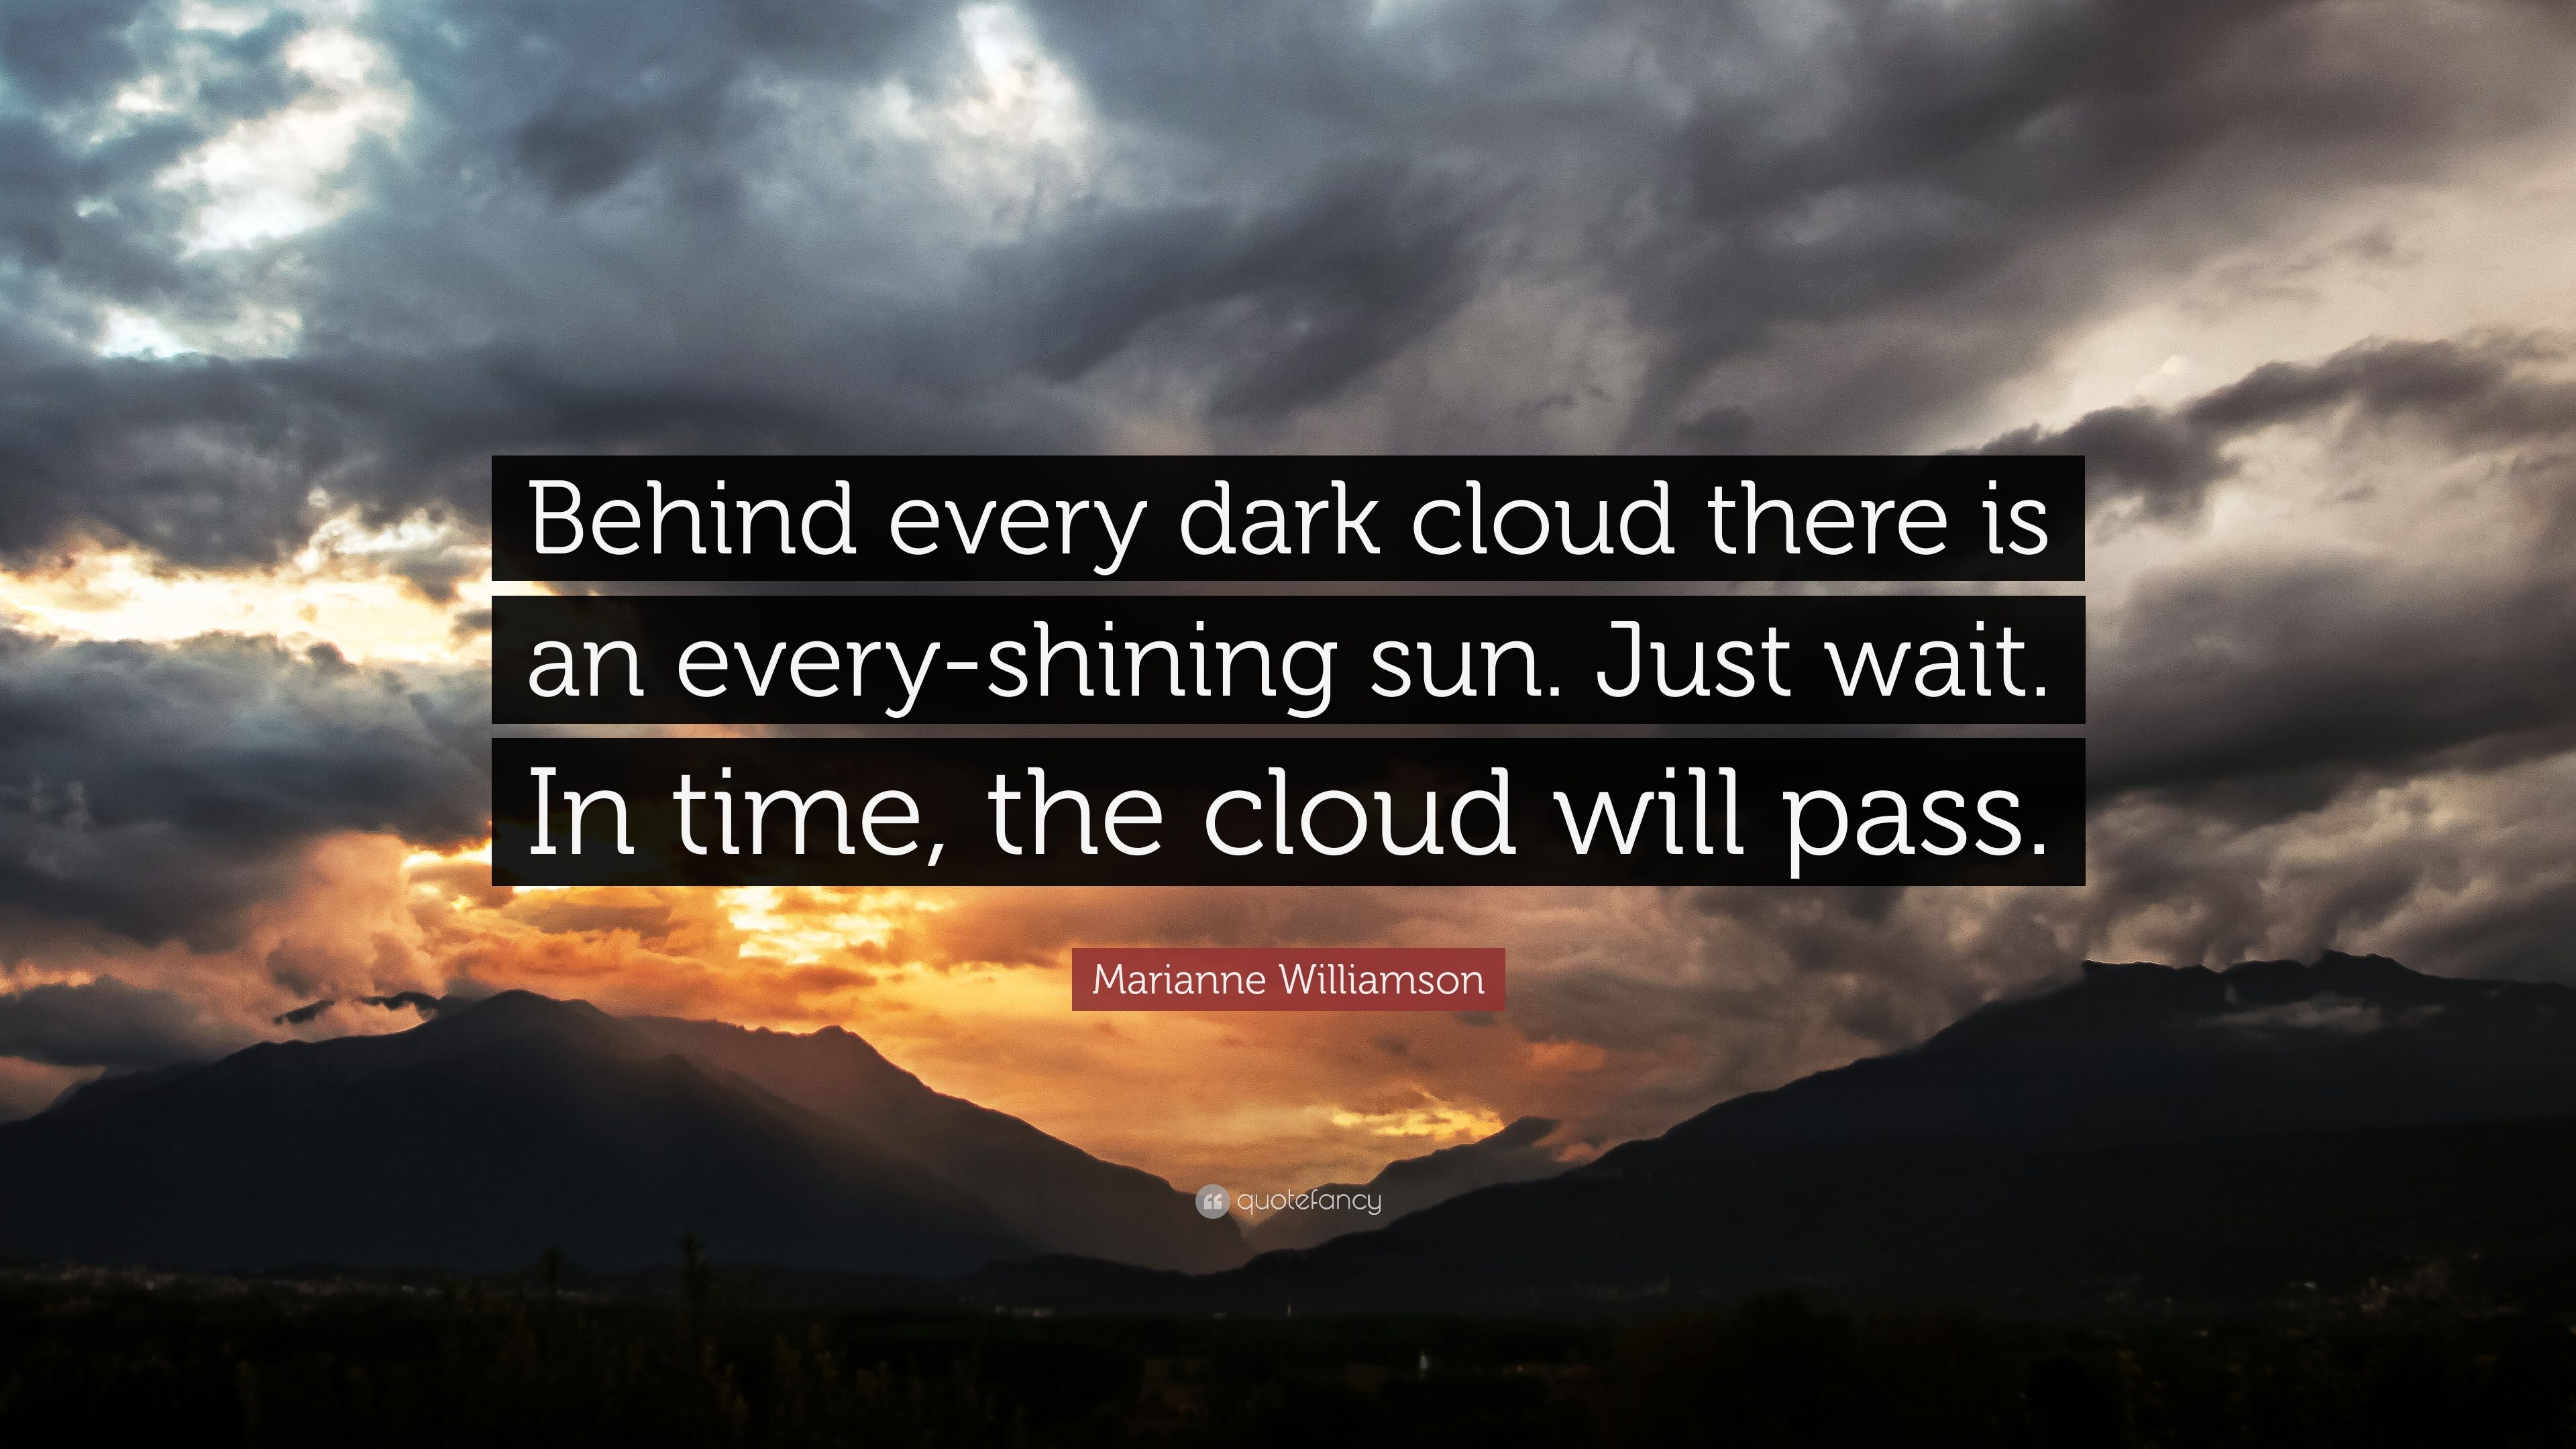 Marianne Williamson Quote: “Behind every dark cloud there is an